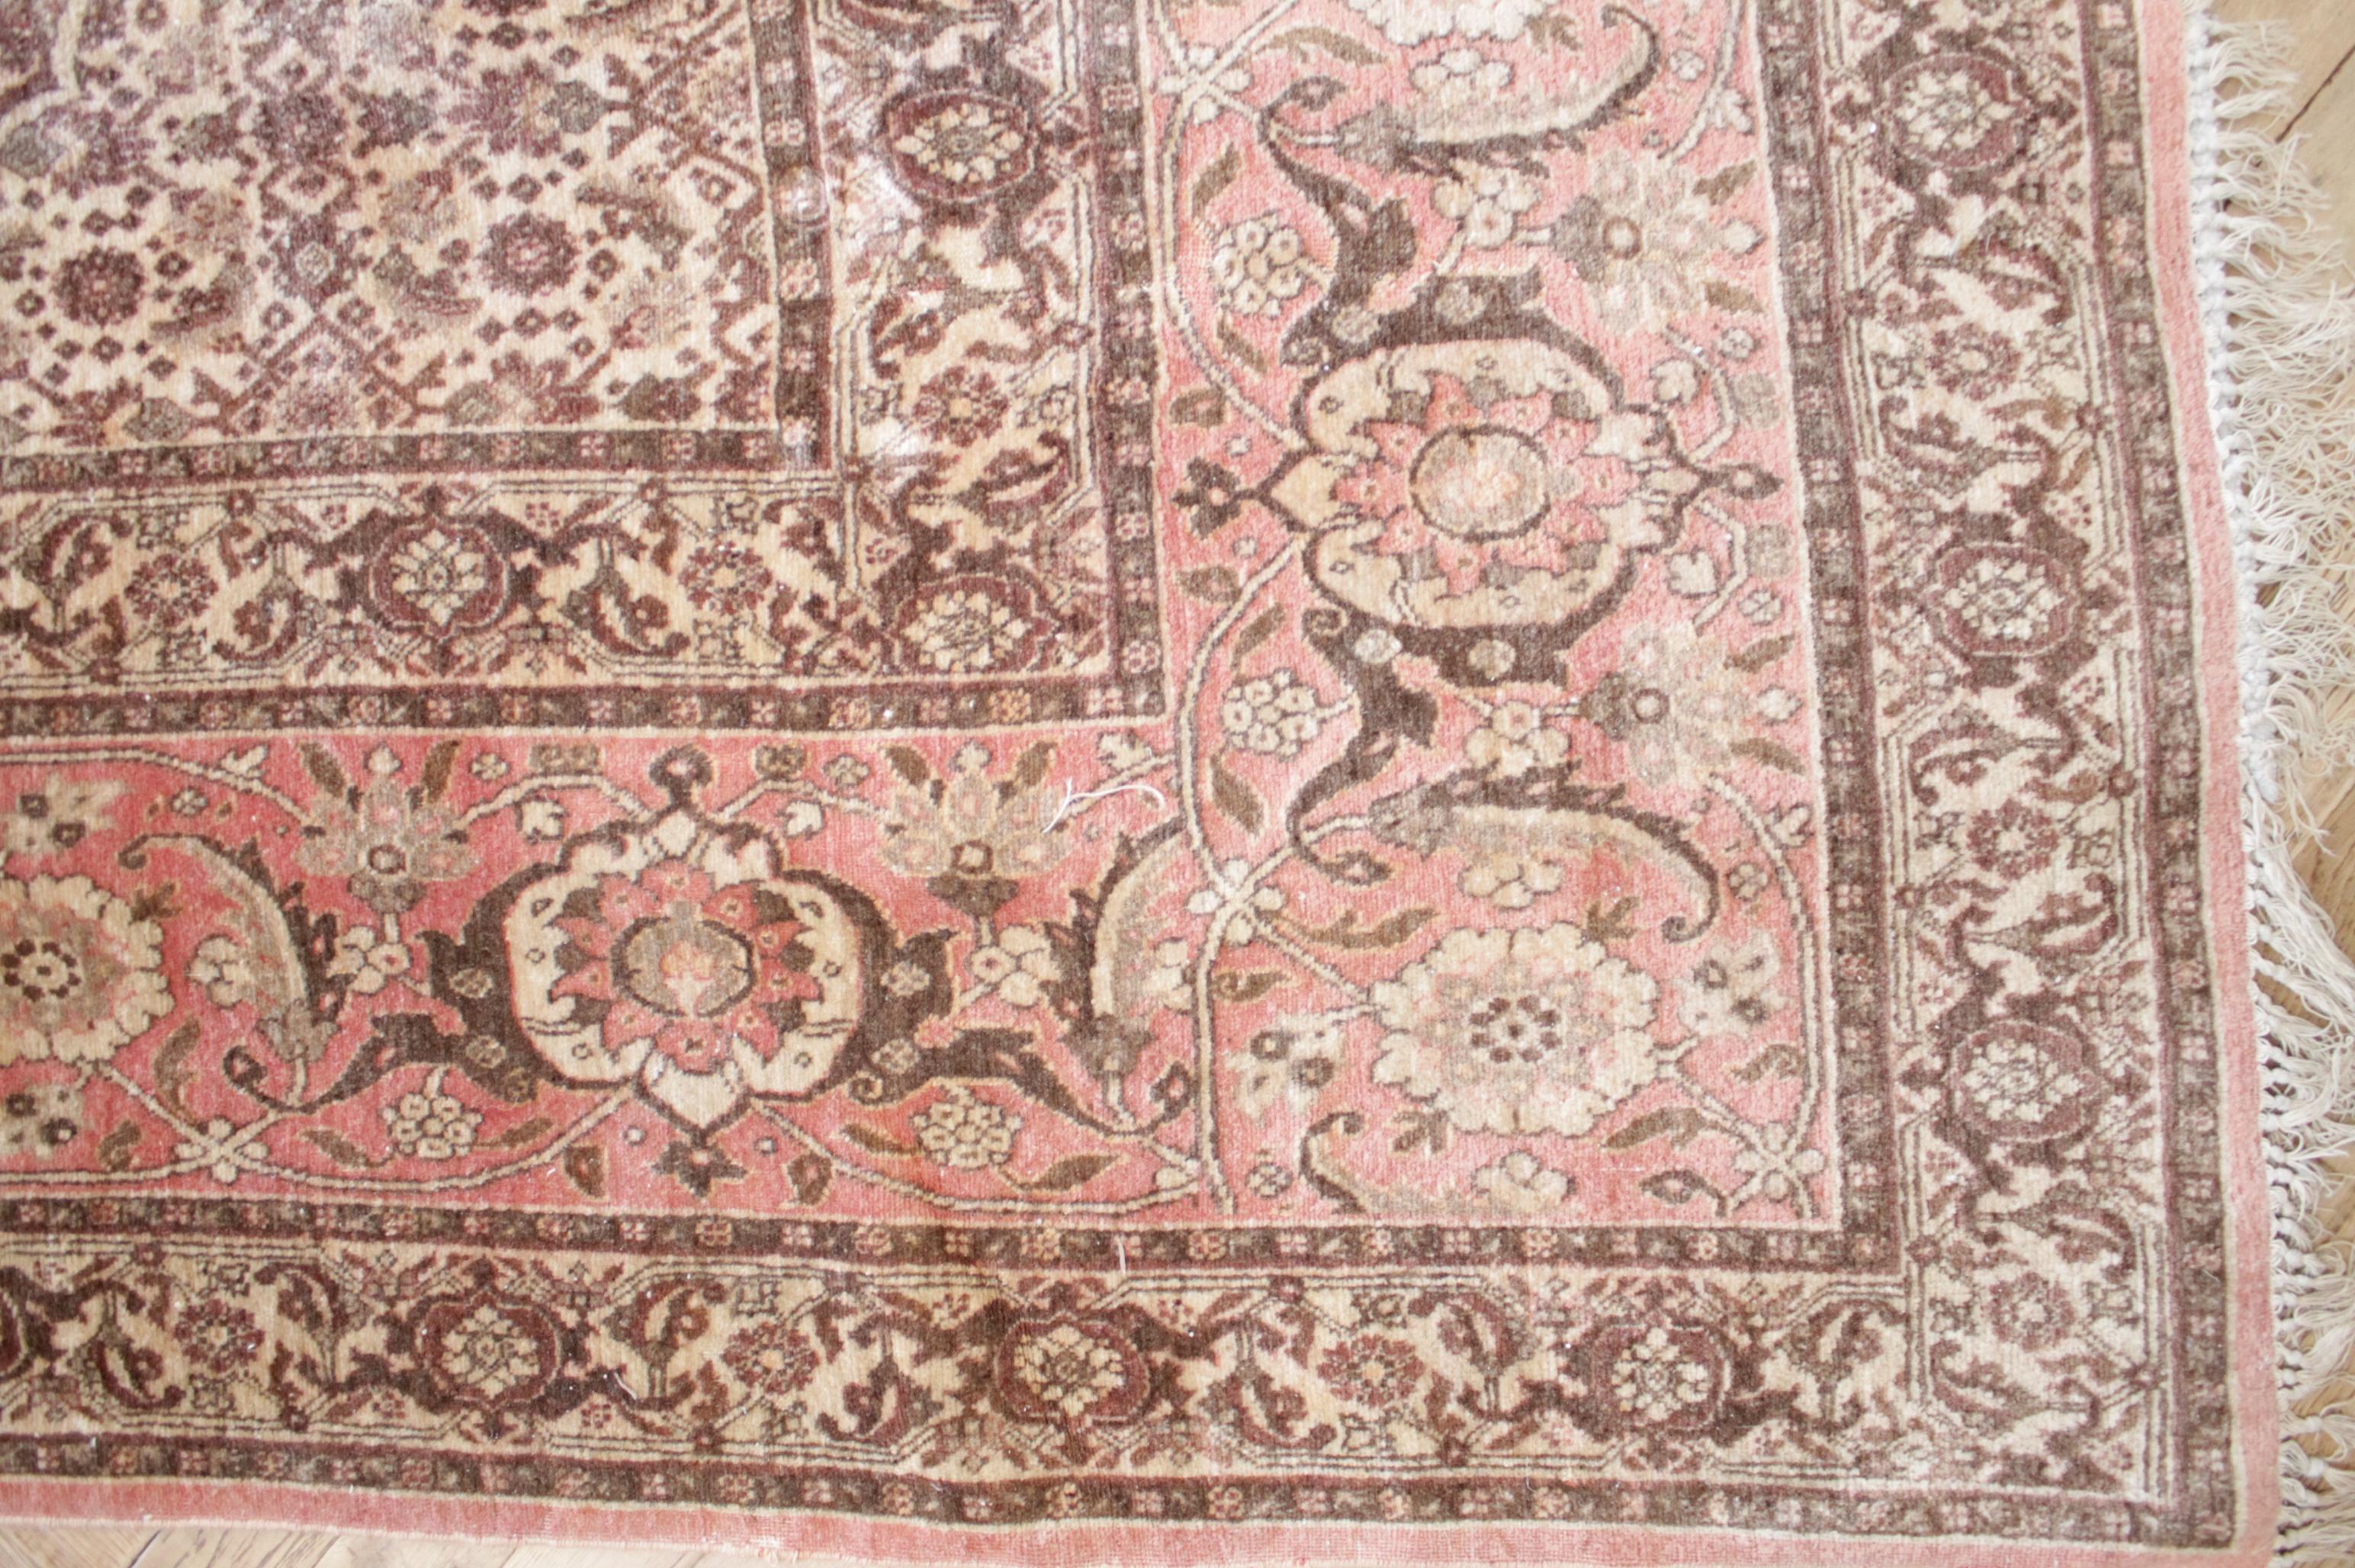 Lovely vintage rug, colors are faded pinks, creams, browns, with tassel ends. Tassels are worn and some longer than others. Subtle markings shown in the photos, area of the rug where there are minor discolorations. Its a beautiful rug, in good